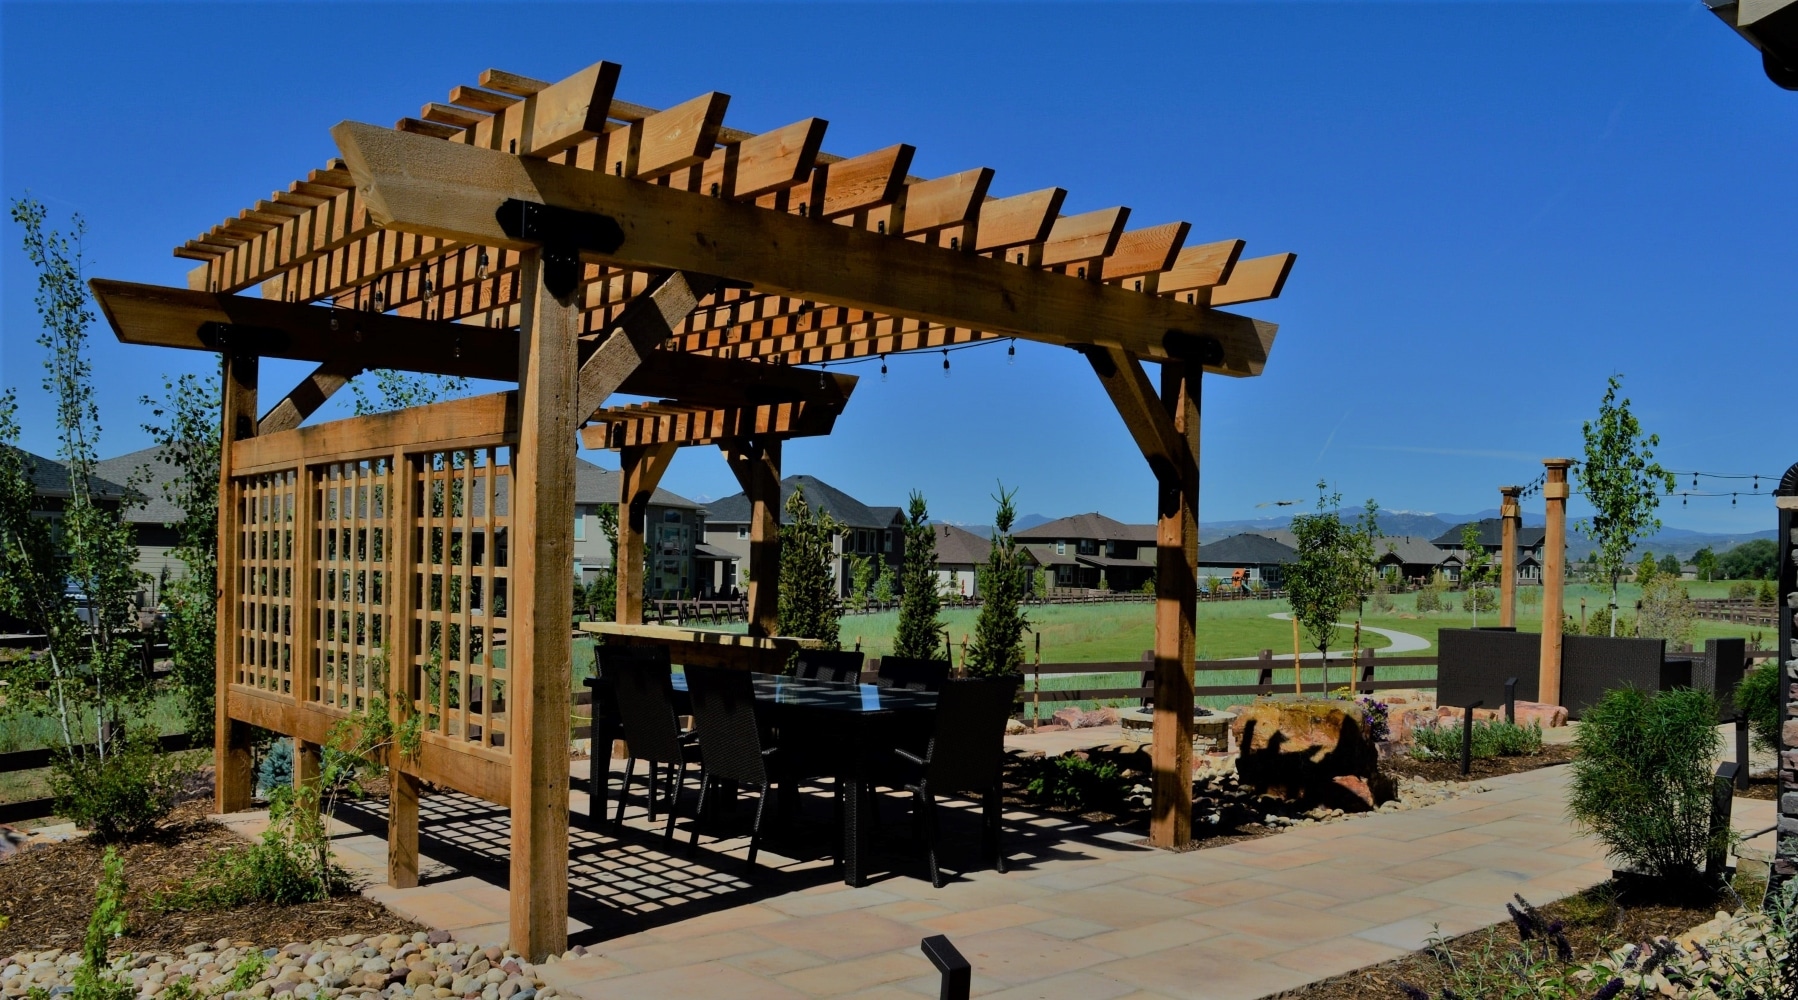 Flat stone patio with pergola over the seating area